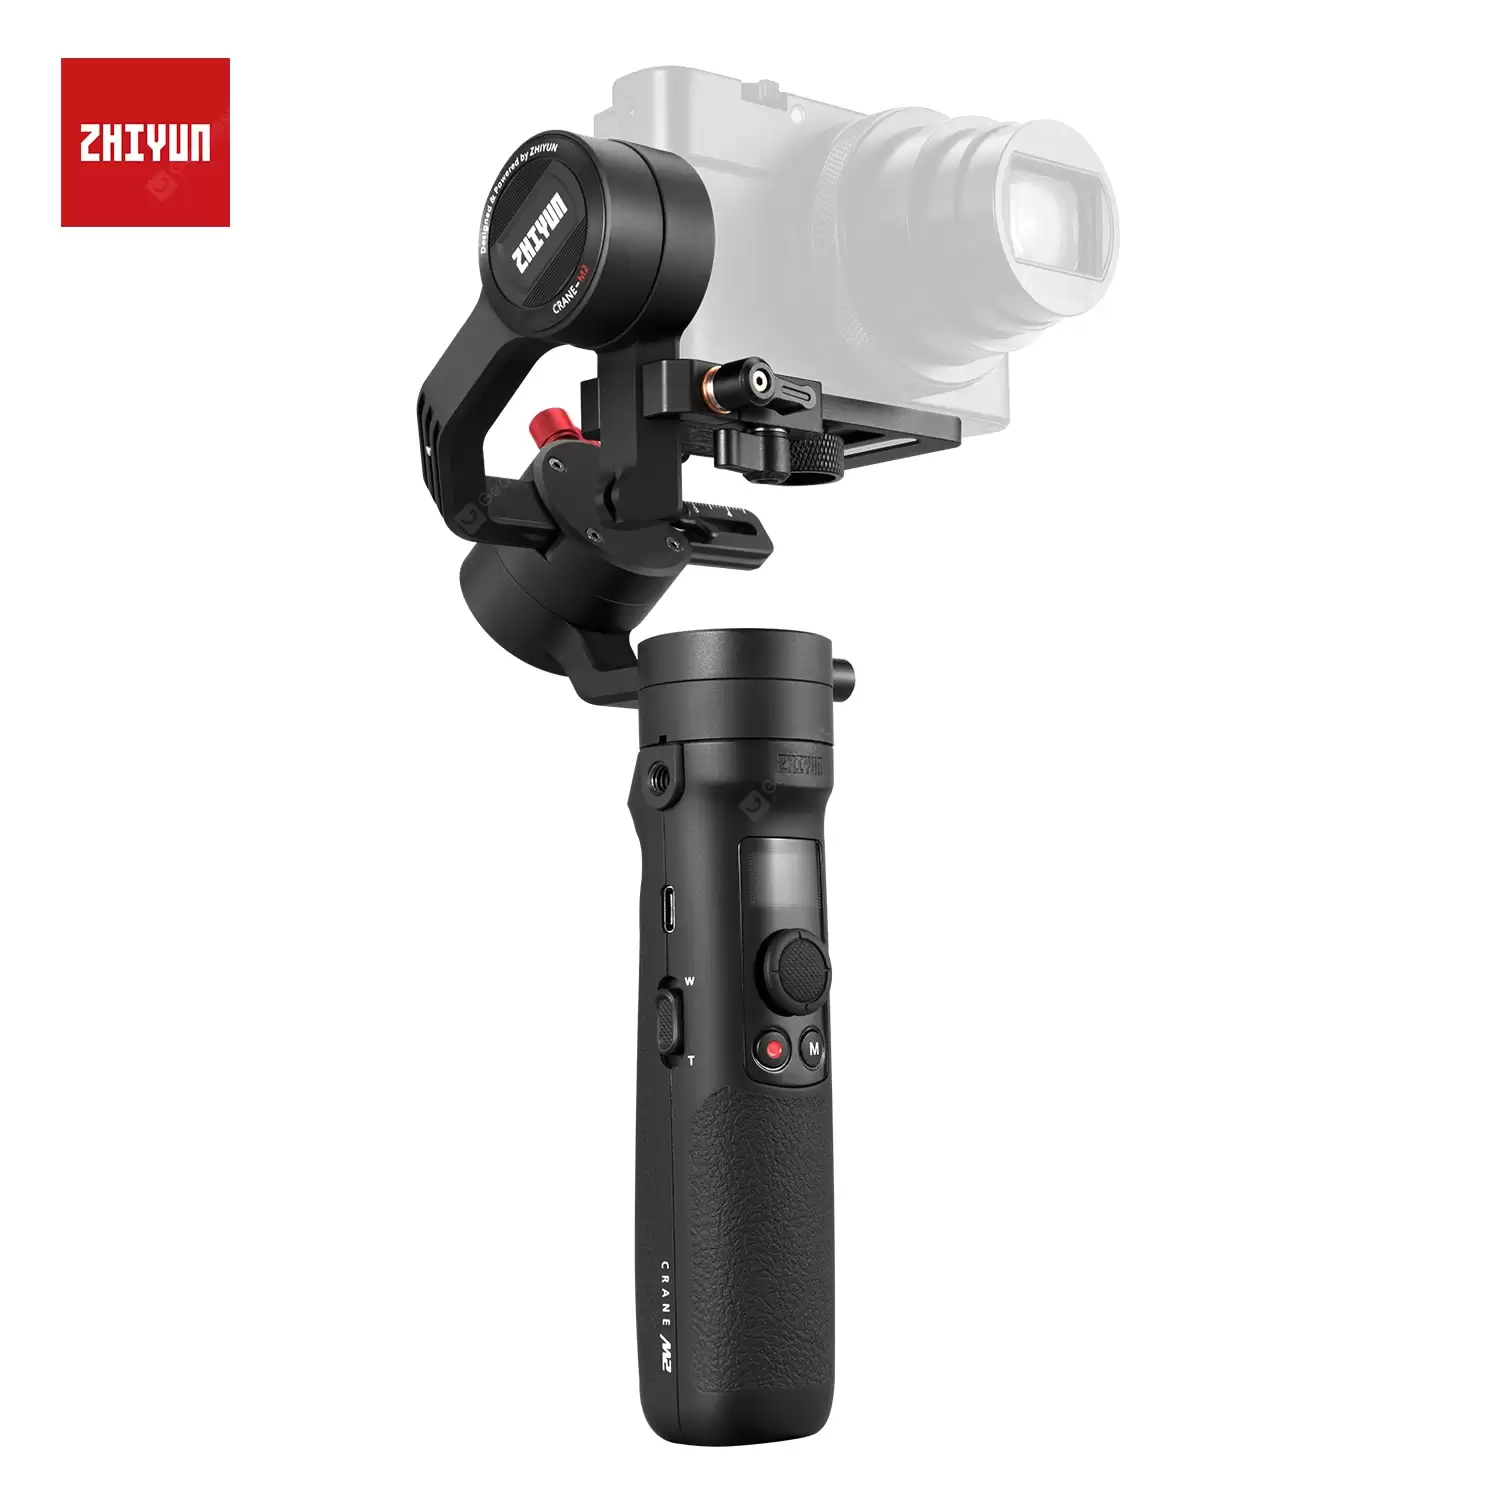 Order In Just $188.00 Zhiyun Official Crane M2 Gimbals For Smartphones Mirrorless Action Compact Ncameras Stabilizer At Gearbest With This Coupon